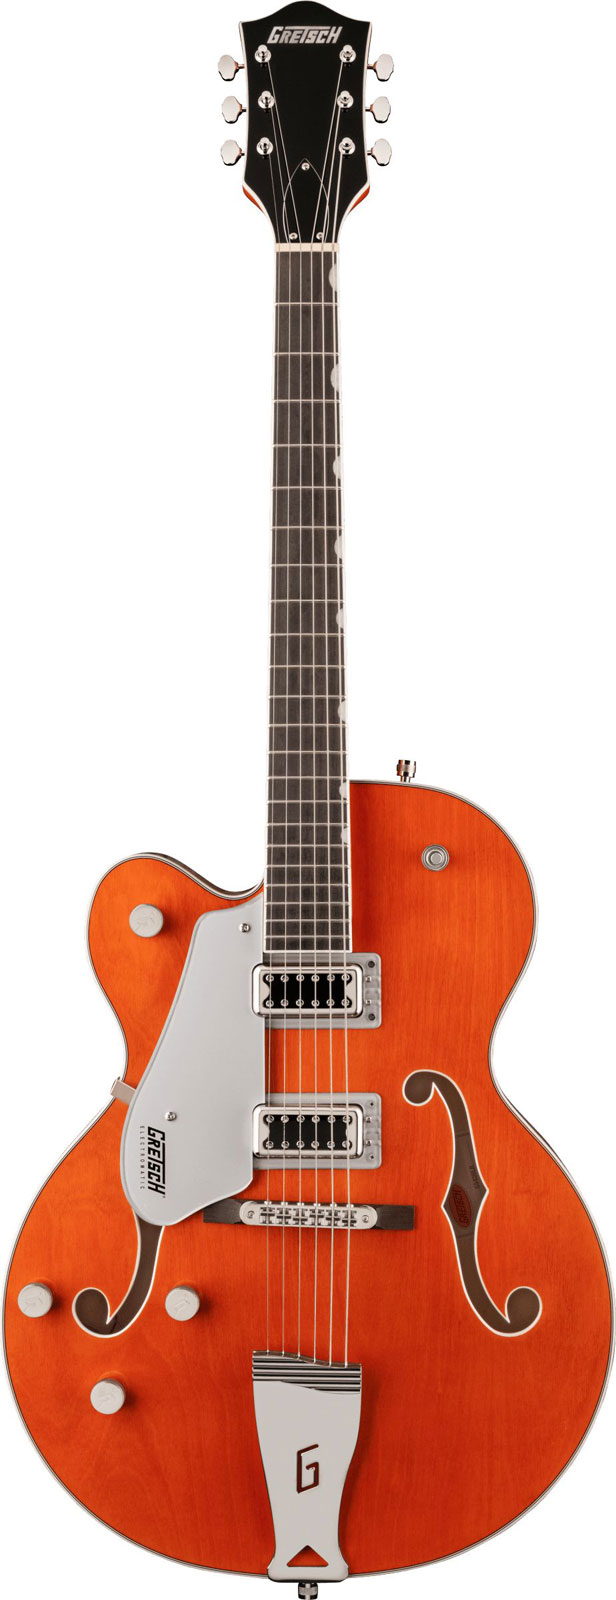 GRETSCH GUITARS G5420LH ELECTROMATIC CLASSIC HOLLOW BODY SINGLE-CUT LEFT-HANDED LRL ORANGE STAIN